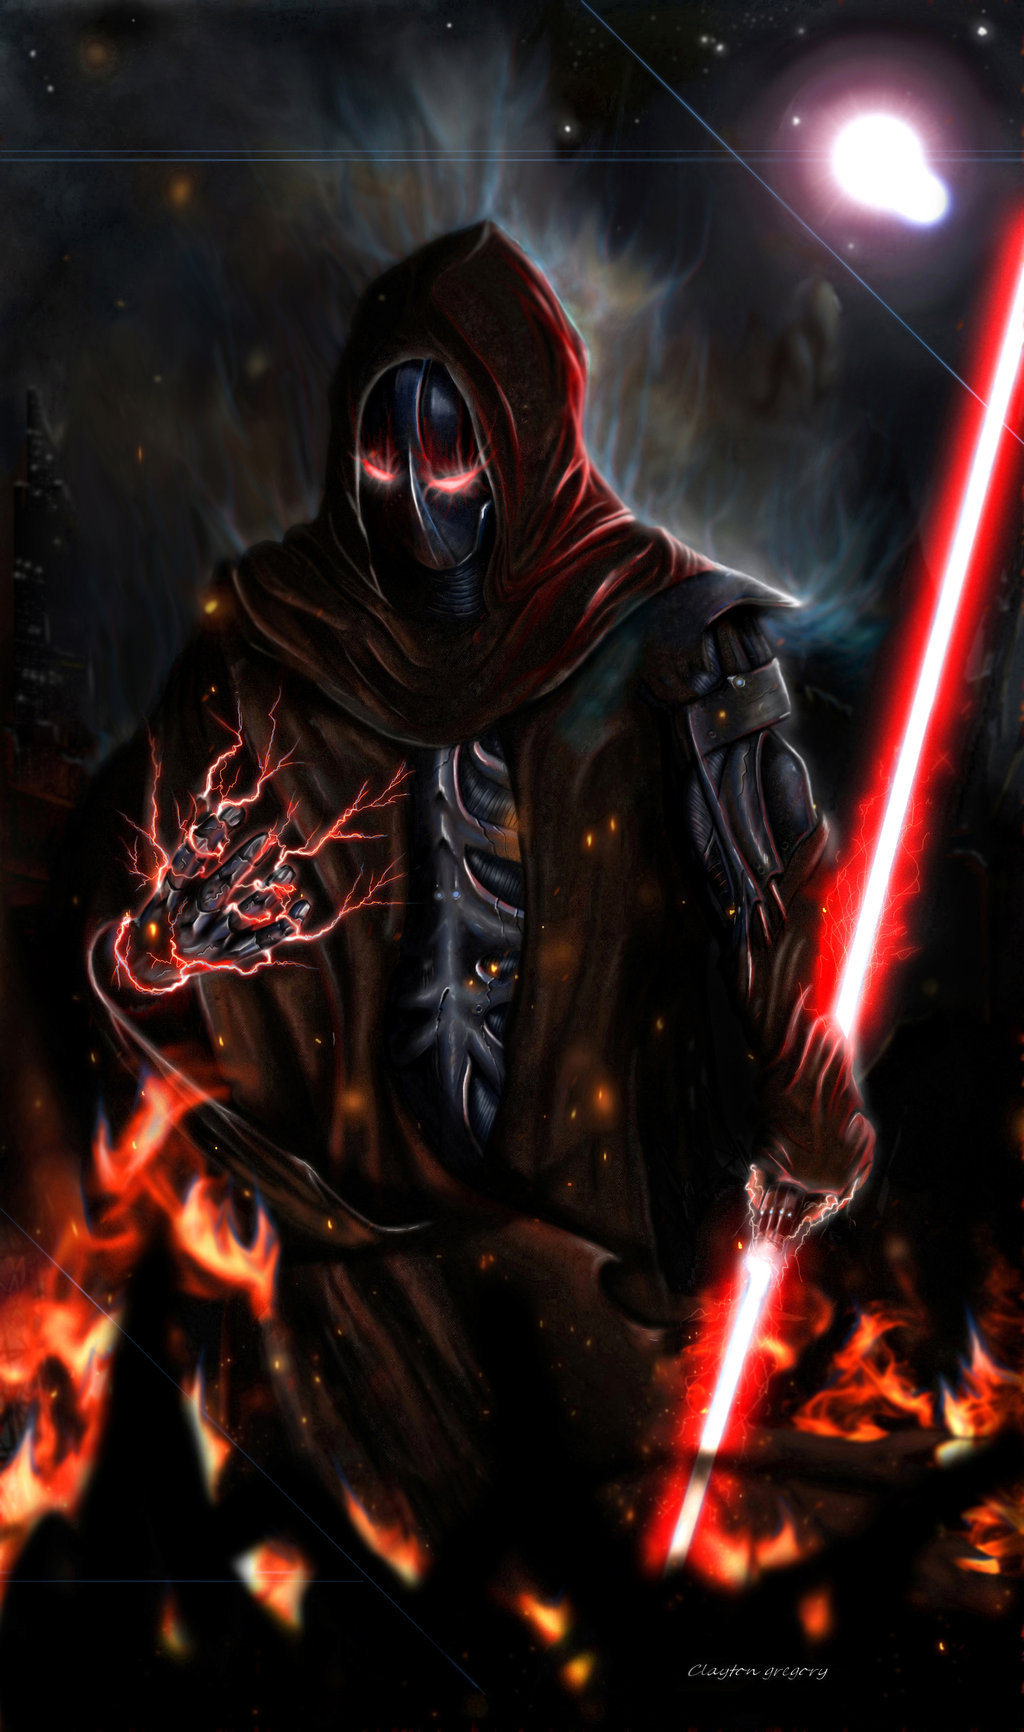 Sith Lord by M for moddel on